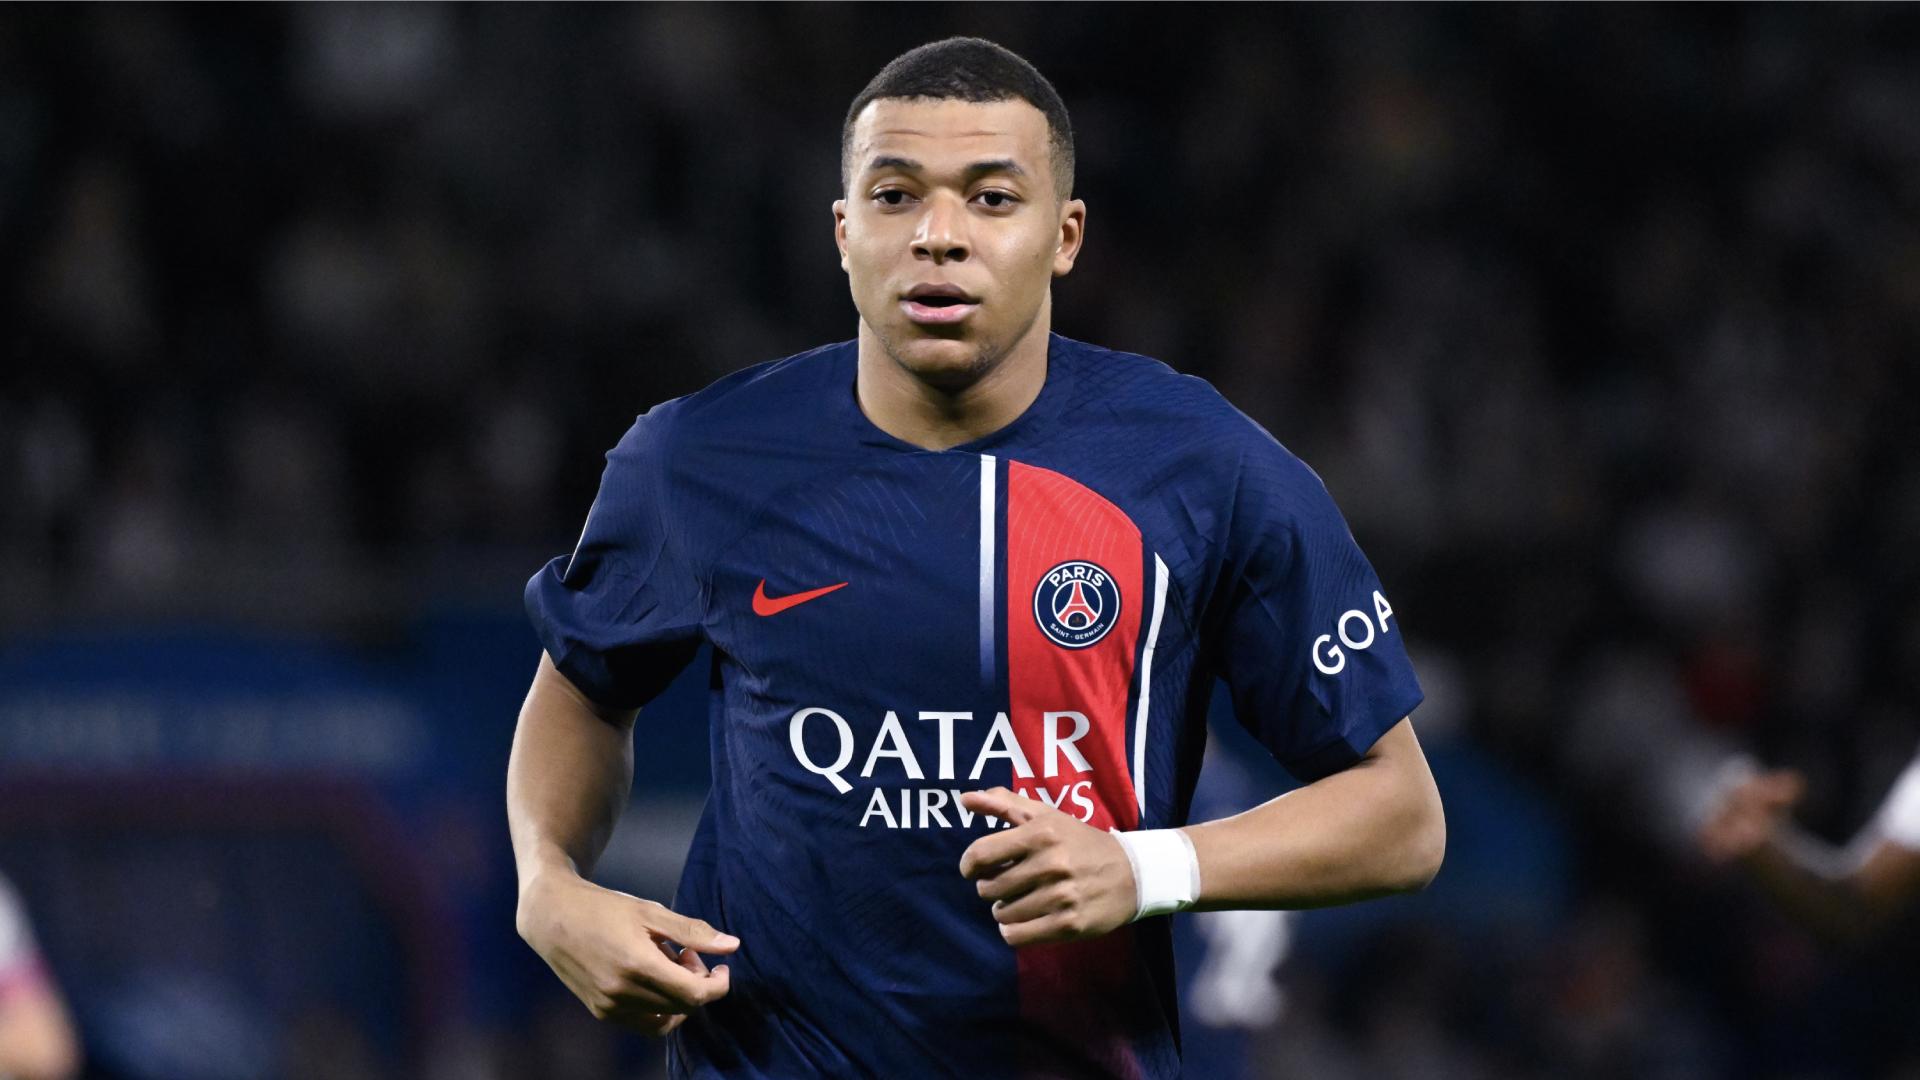 VIDEO | Ligue 1 Highlights: PSG vs Clermont Foot